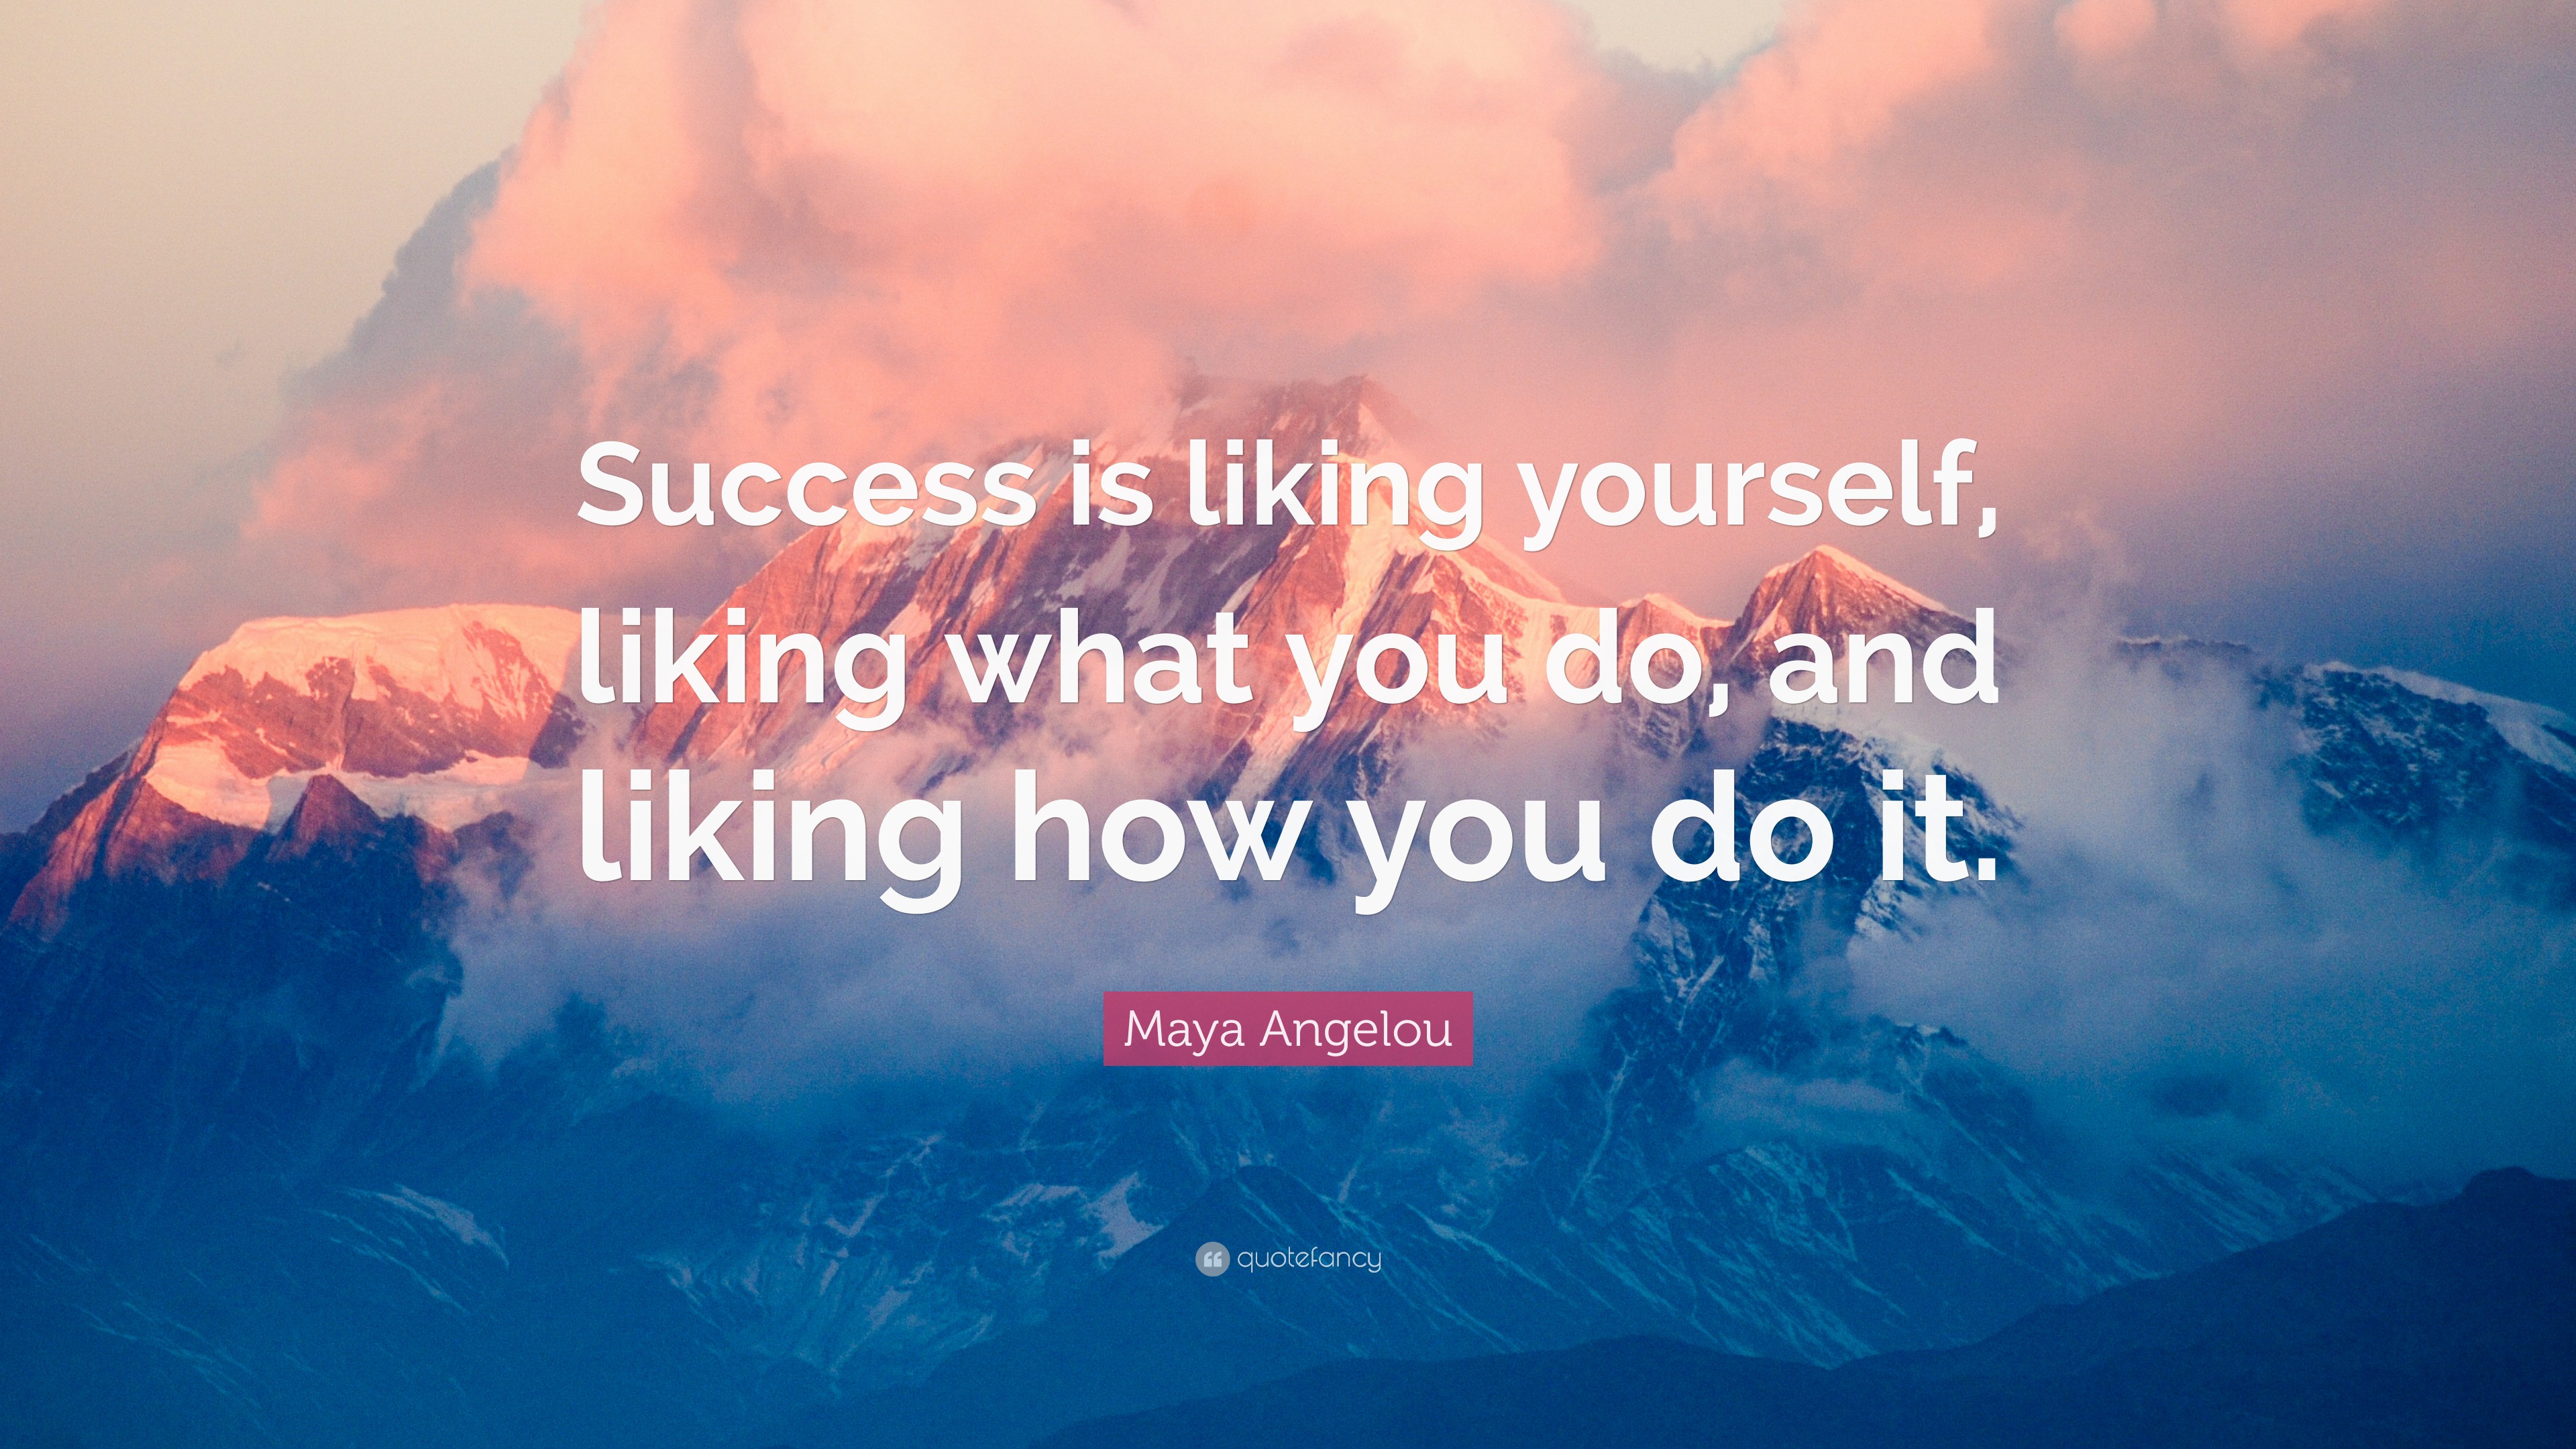 Maya Angelou Quote: “Success is liking yourself, liking what you do ...